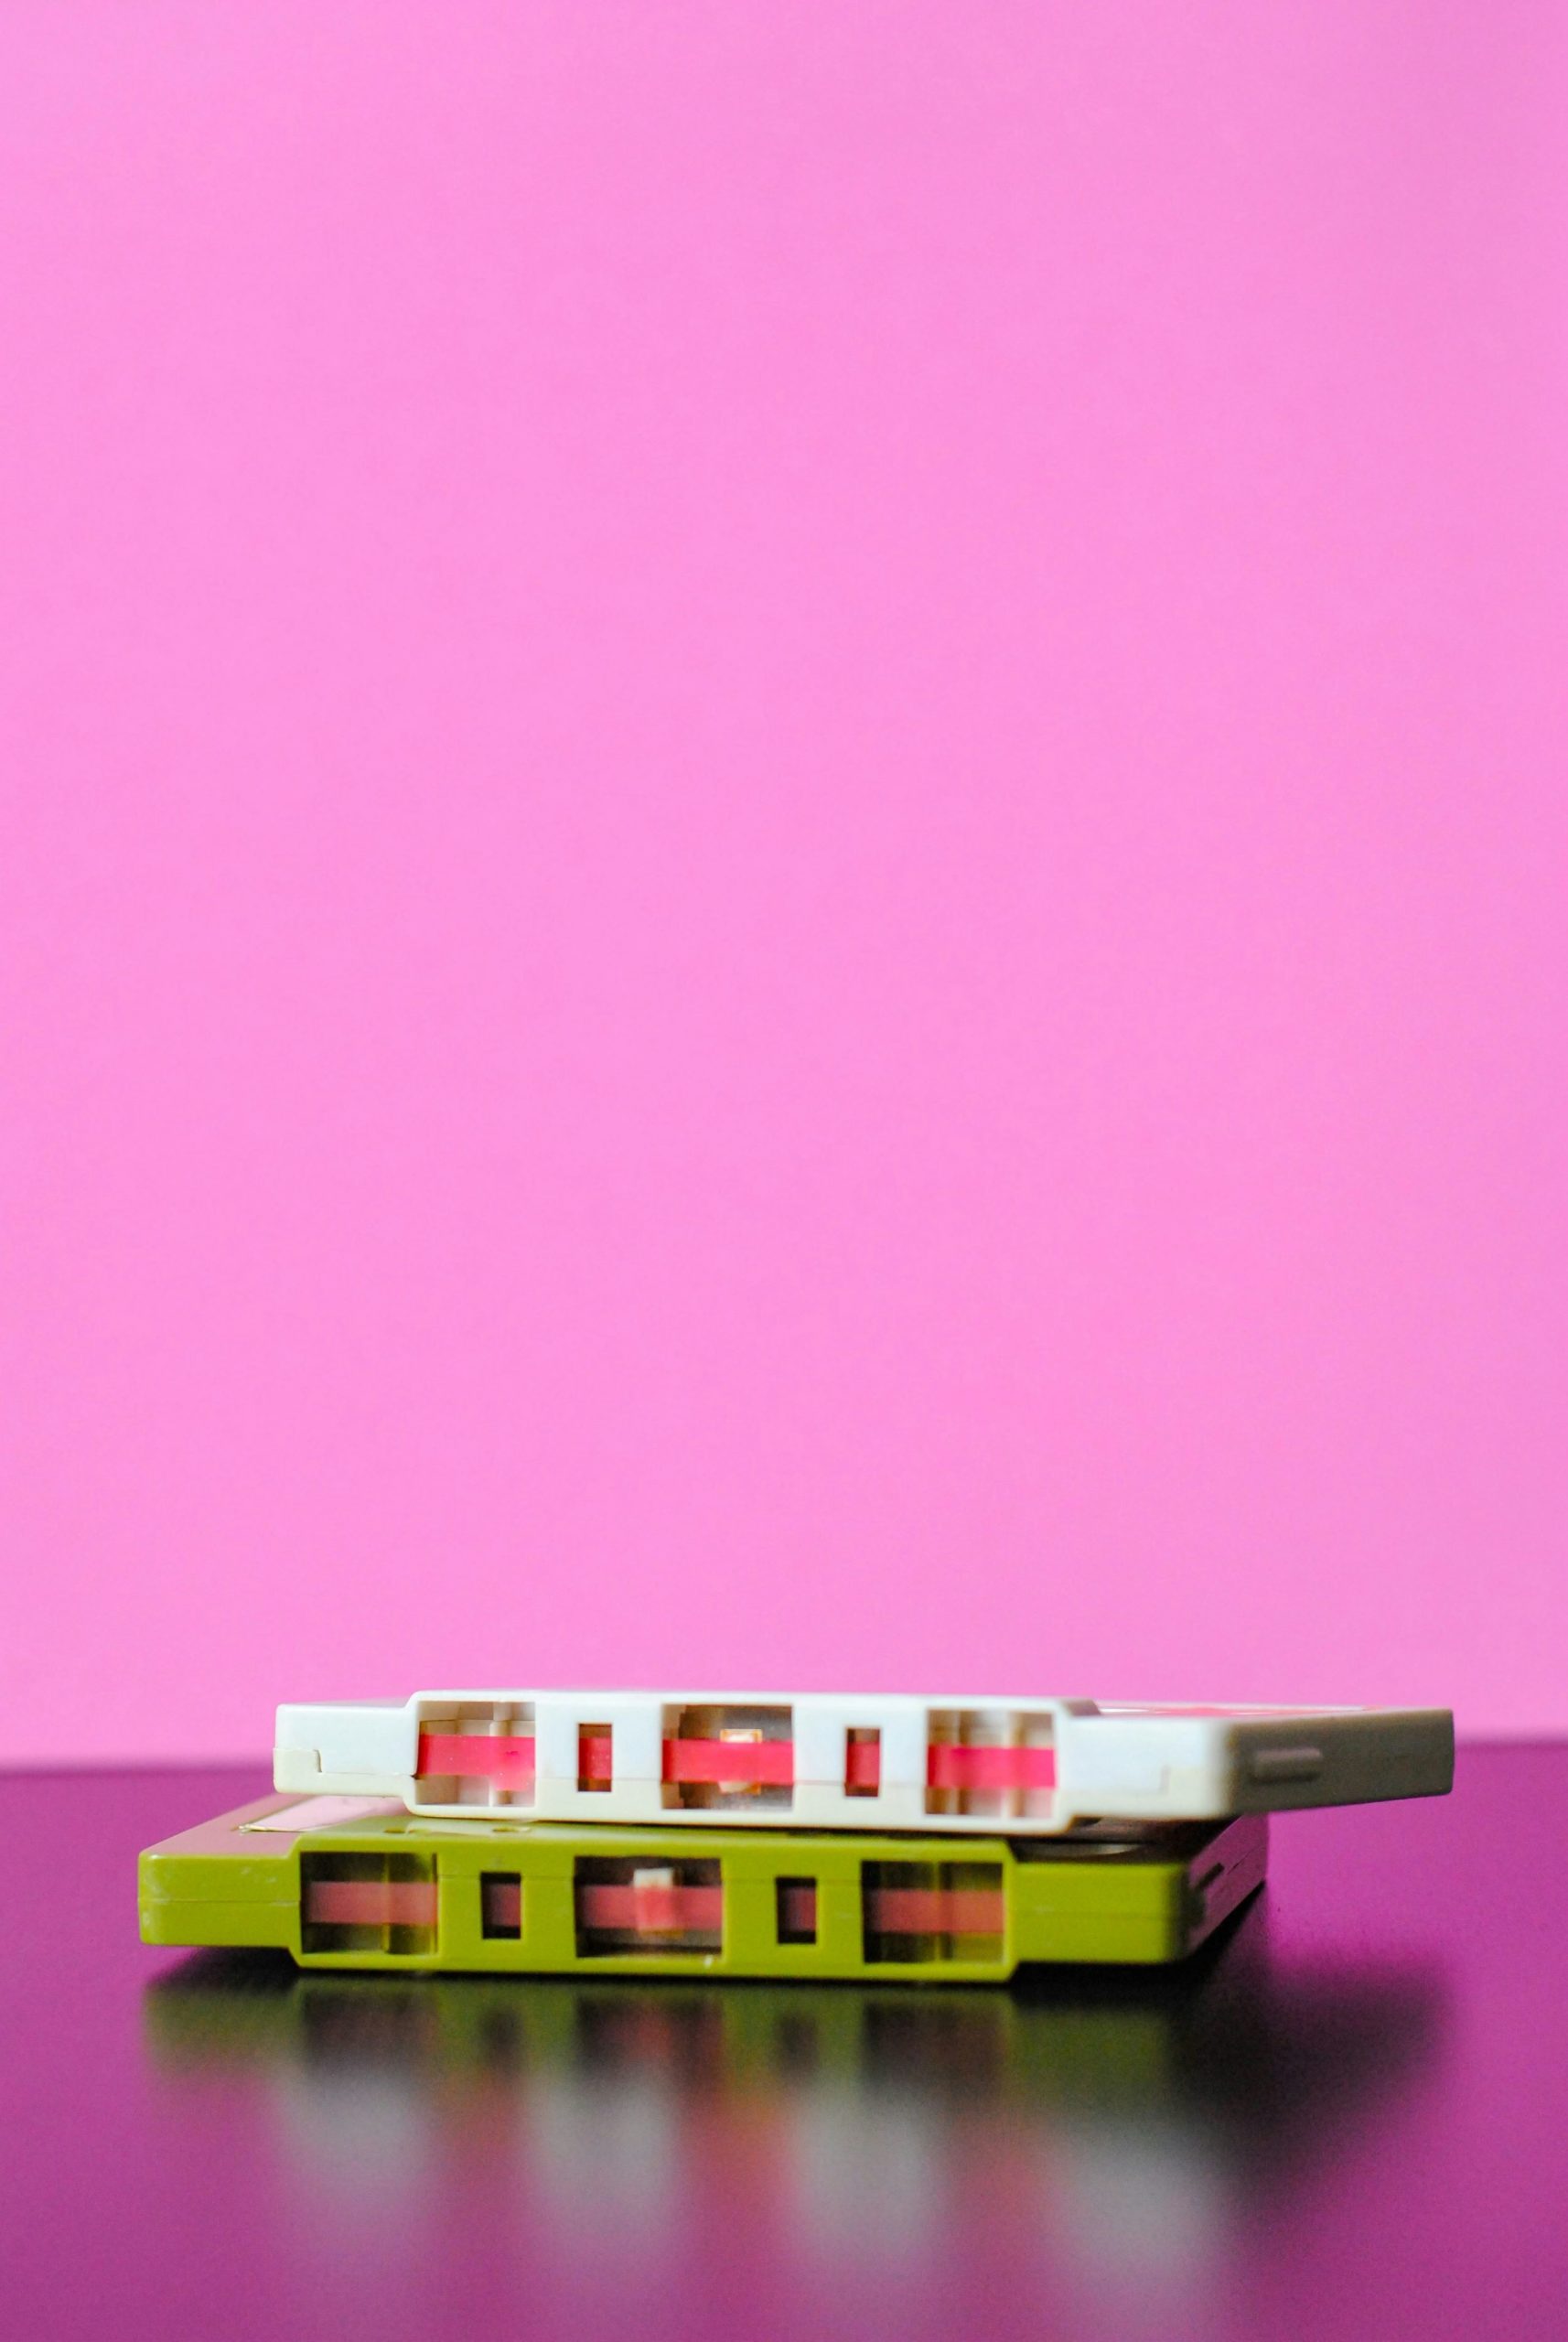 cassette tapes on bright pink background